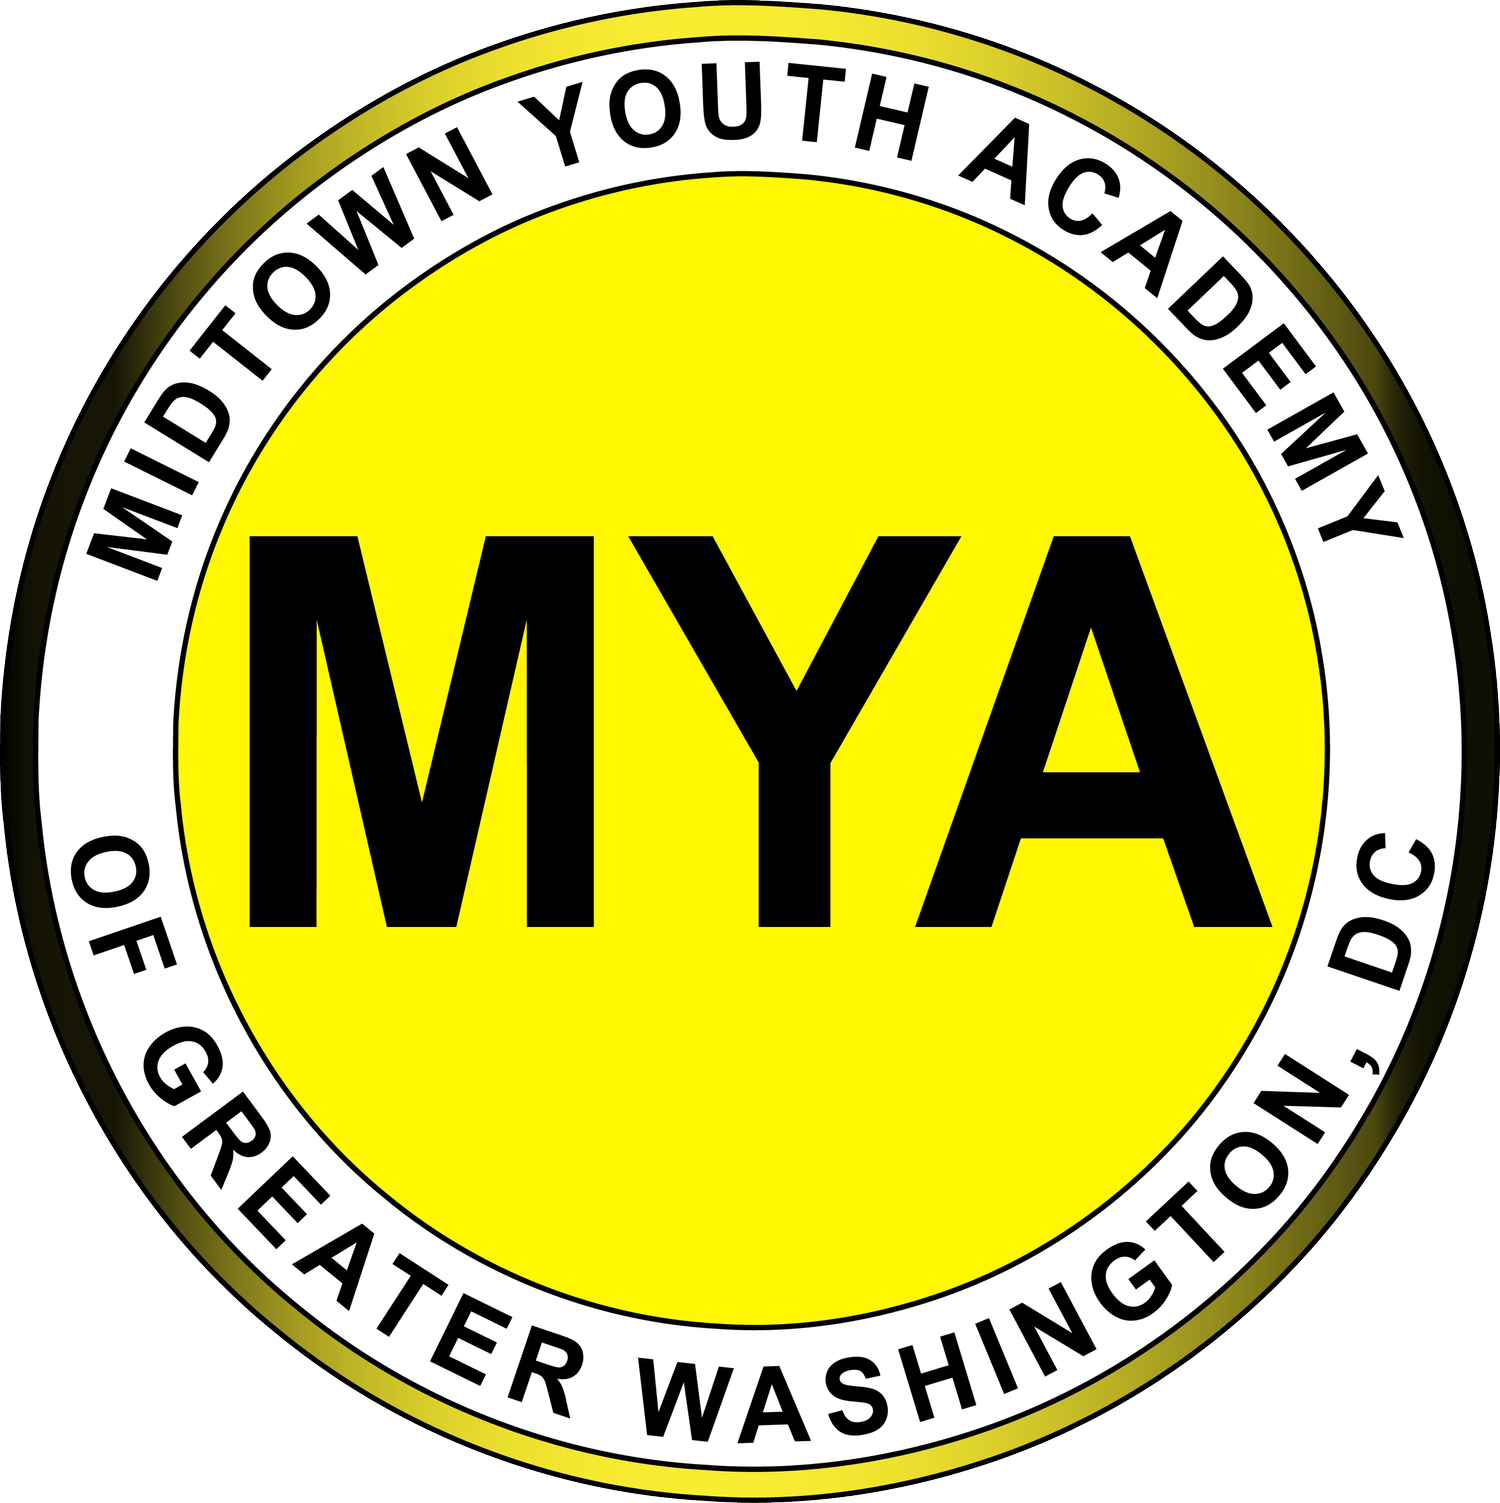 Midtown Youth Academy